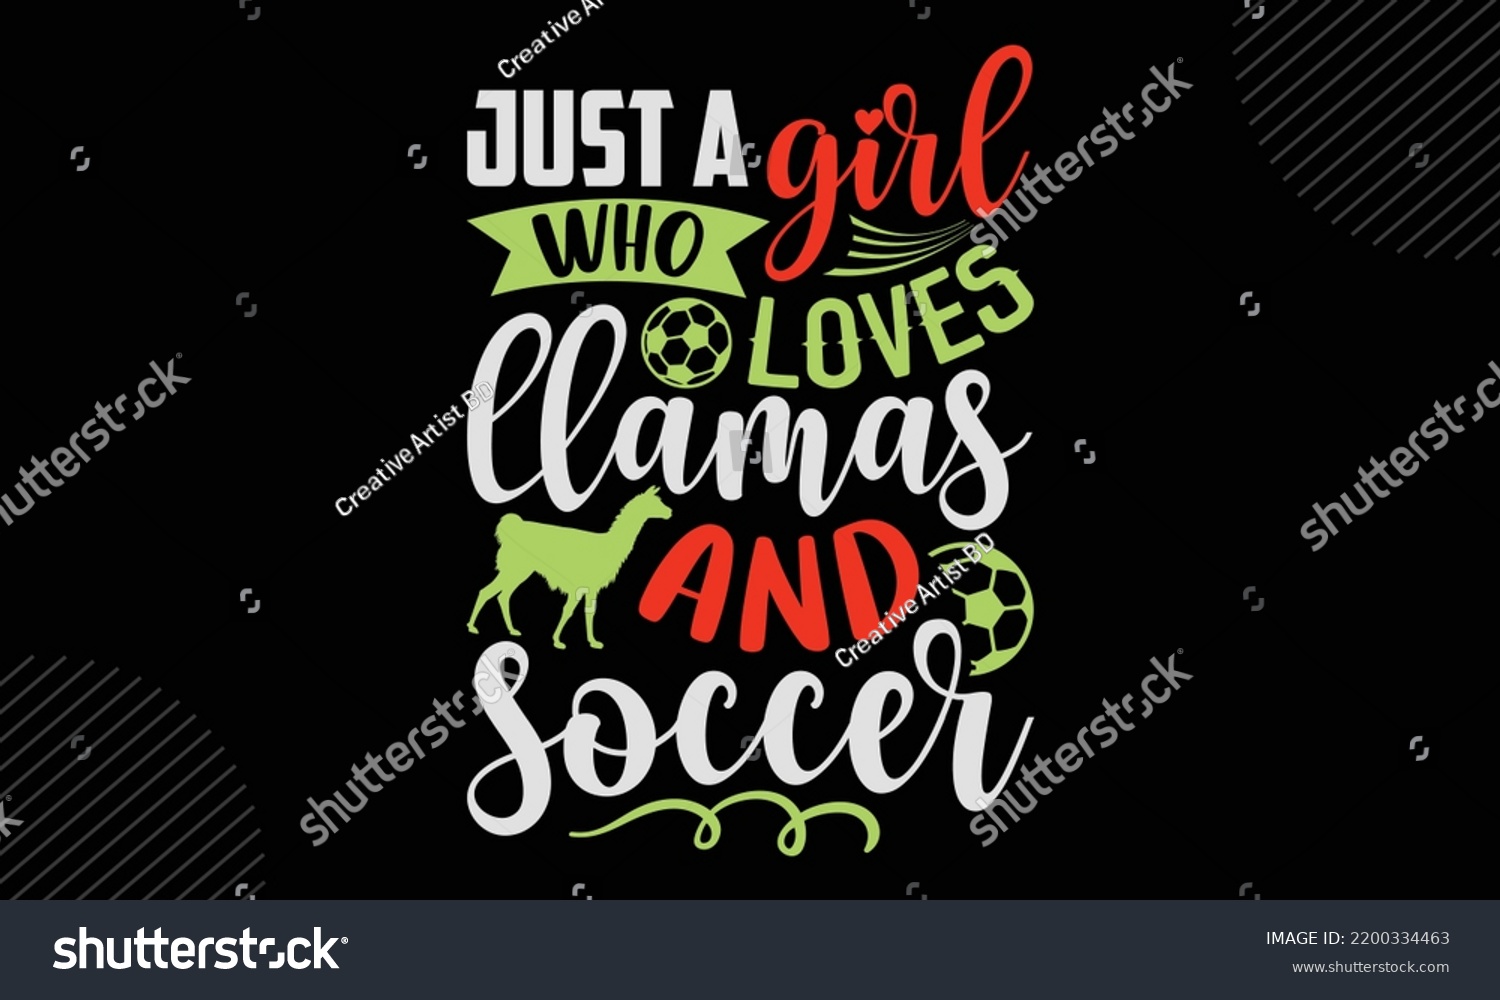 SVG of Just A Girl Who Loves Llamas And Soccer - Llama T shirt Design, Hand drawn vintage illustration with hand-lettering and decoration elements, Cut Files for Cricut Svg, Digital Download svg